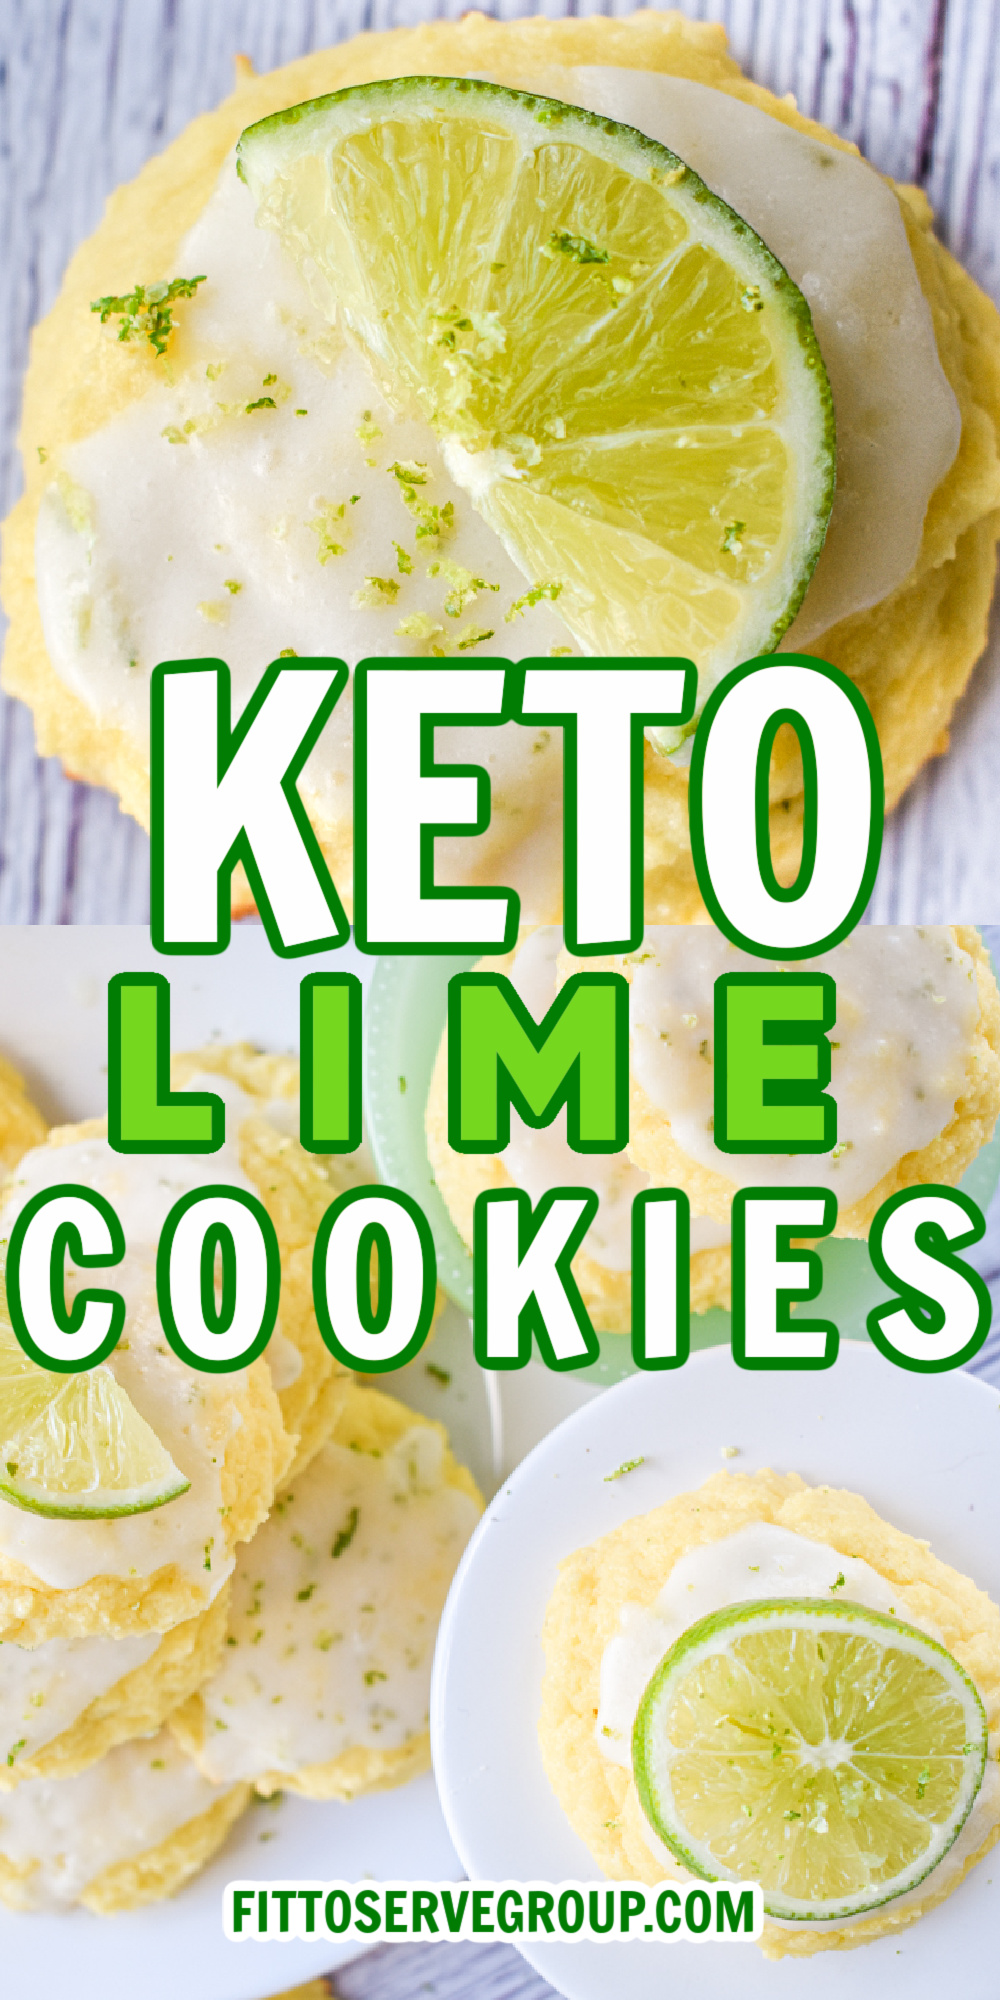 keto lime cookies displayed on white plates and sliced limes